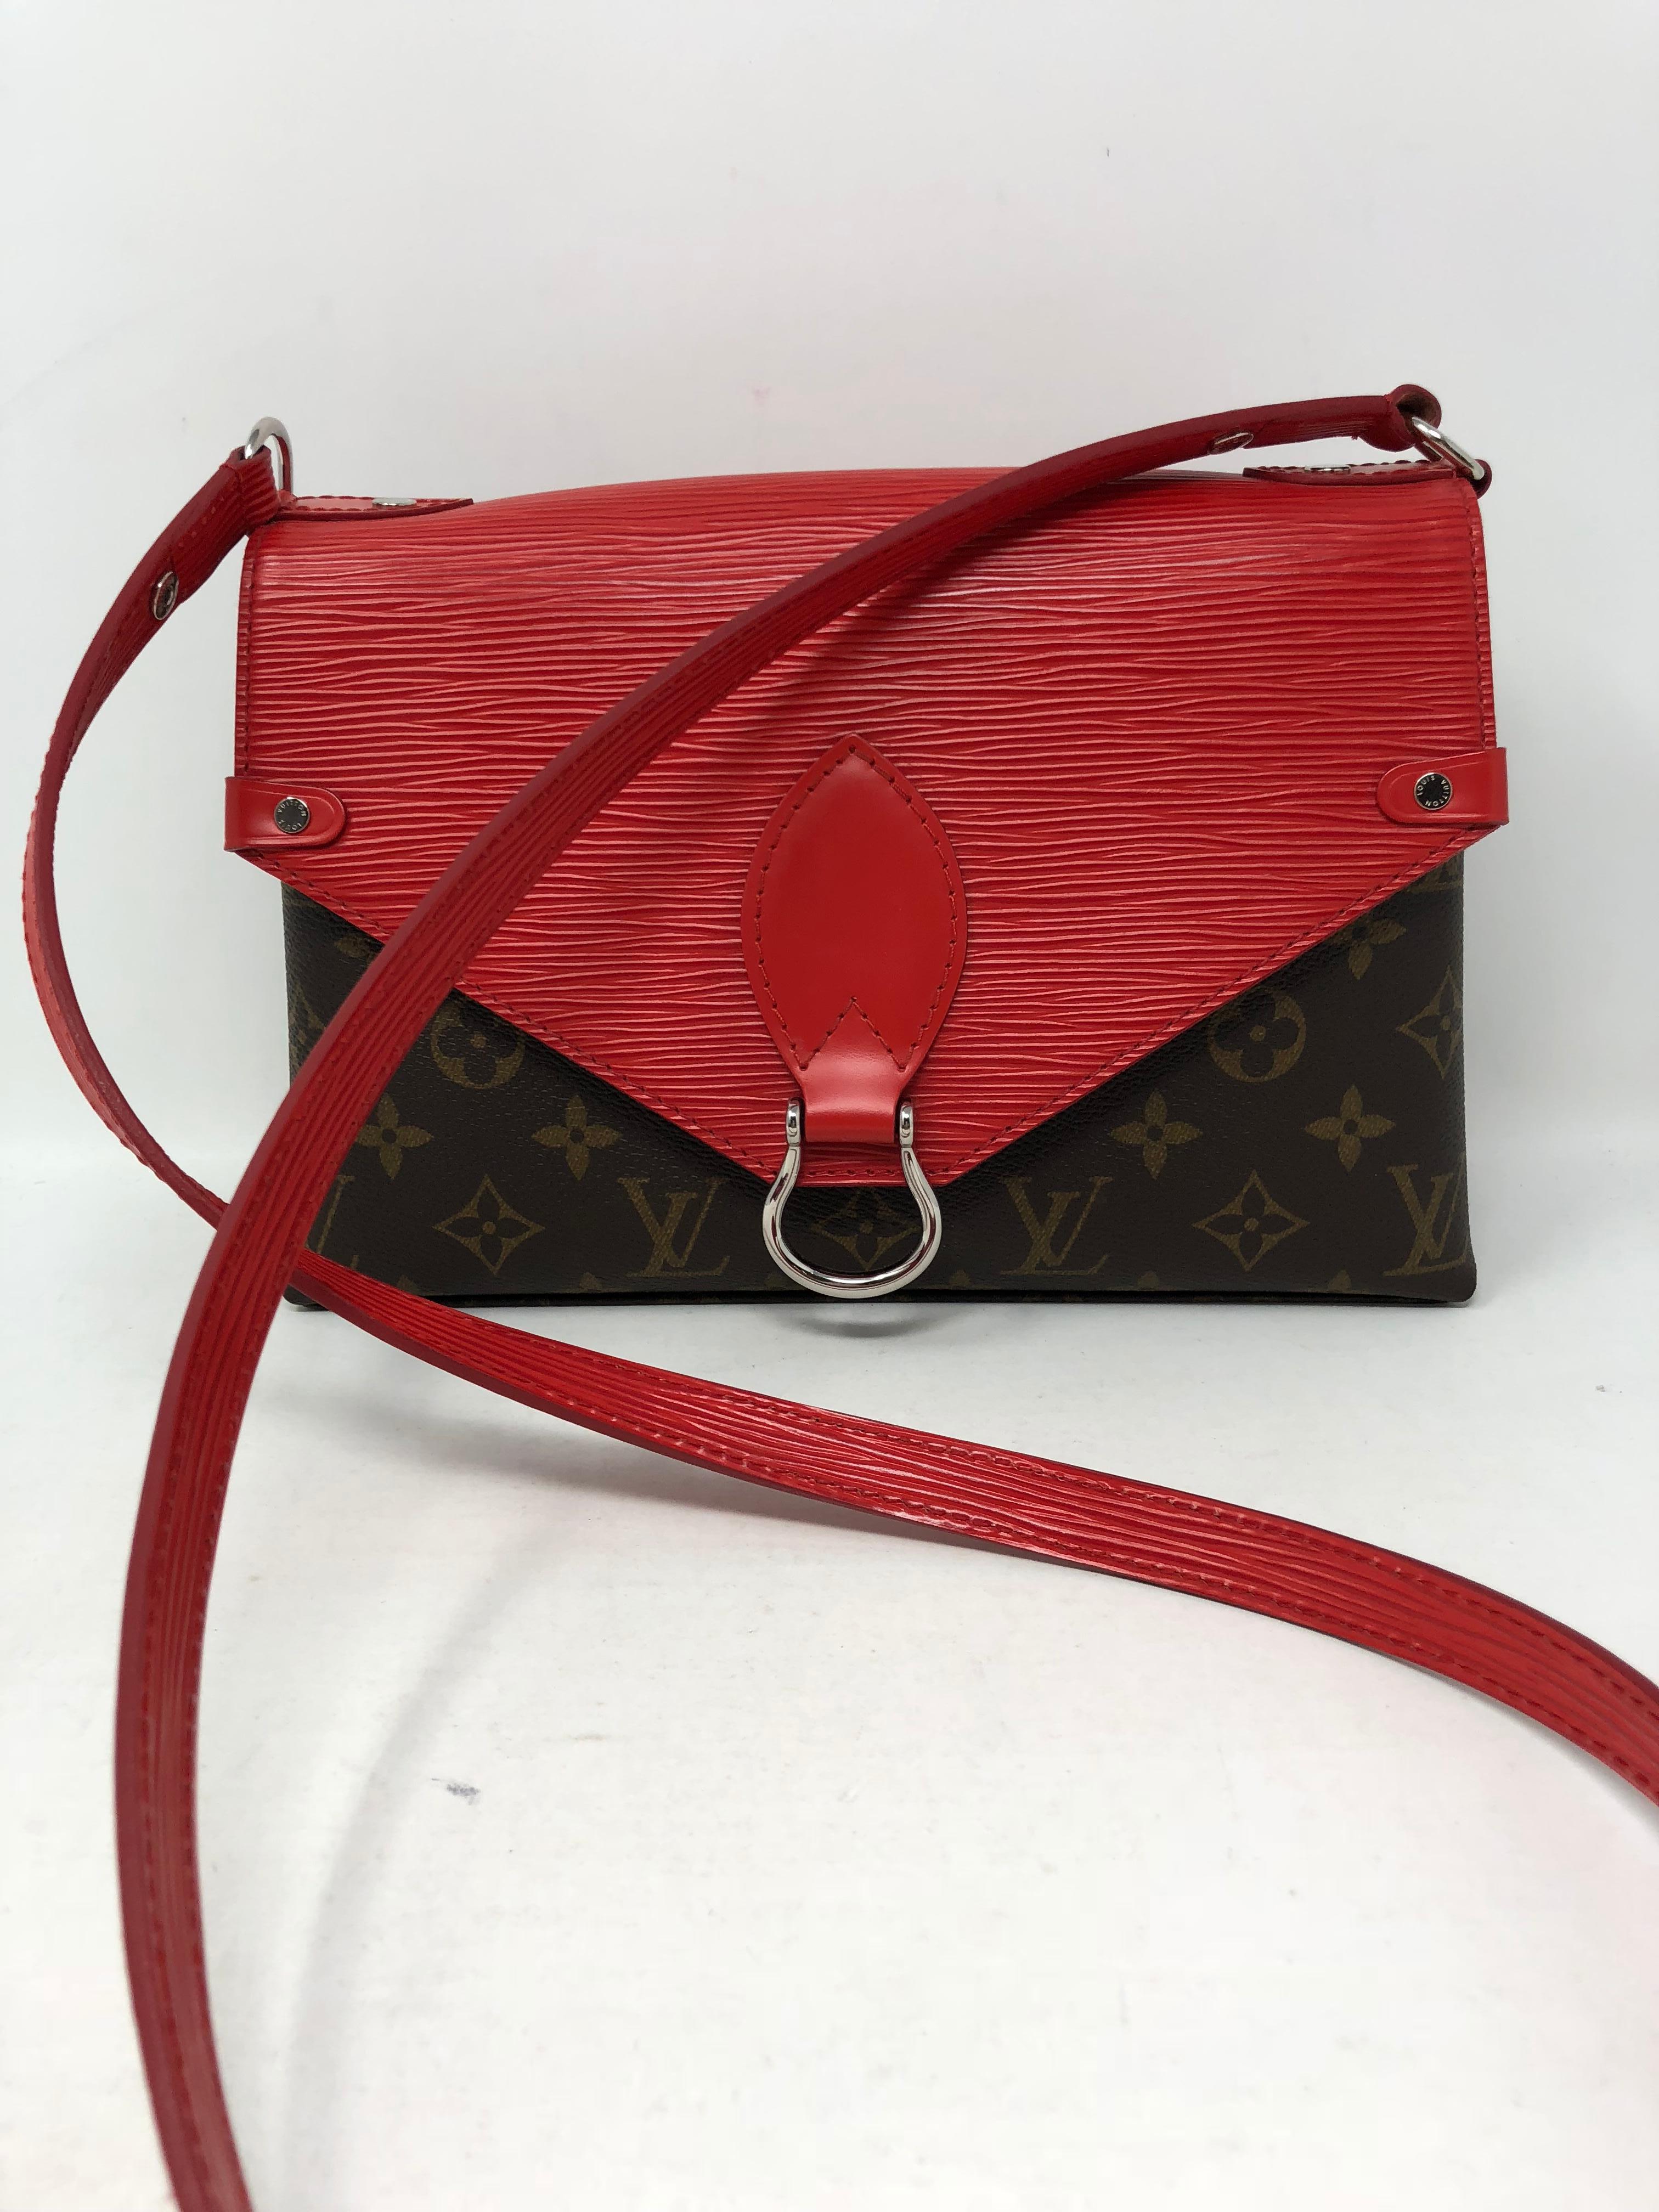 Louis Vuitton Saint Michel crossbody bag with red epi leather trim. Monogram canvas and epi leather marriaged together perfectly. This is a versatile bag. The strap can be adjusted to wear longer and shorter. Brand new and sold out at LV. Guaranteed